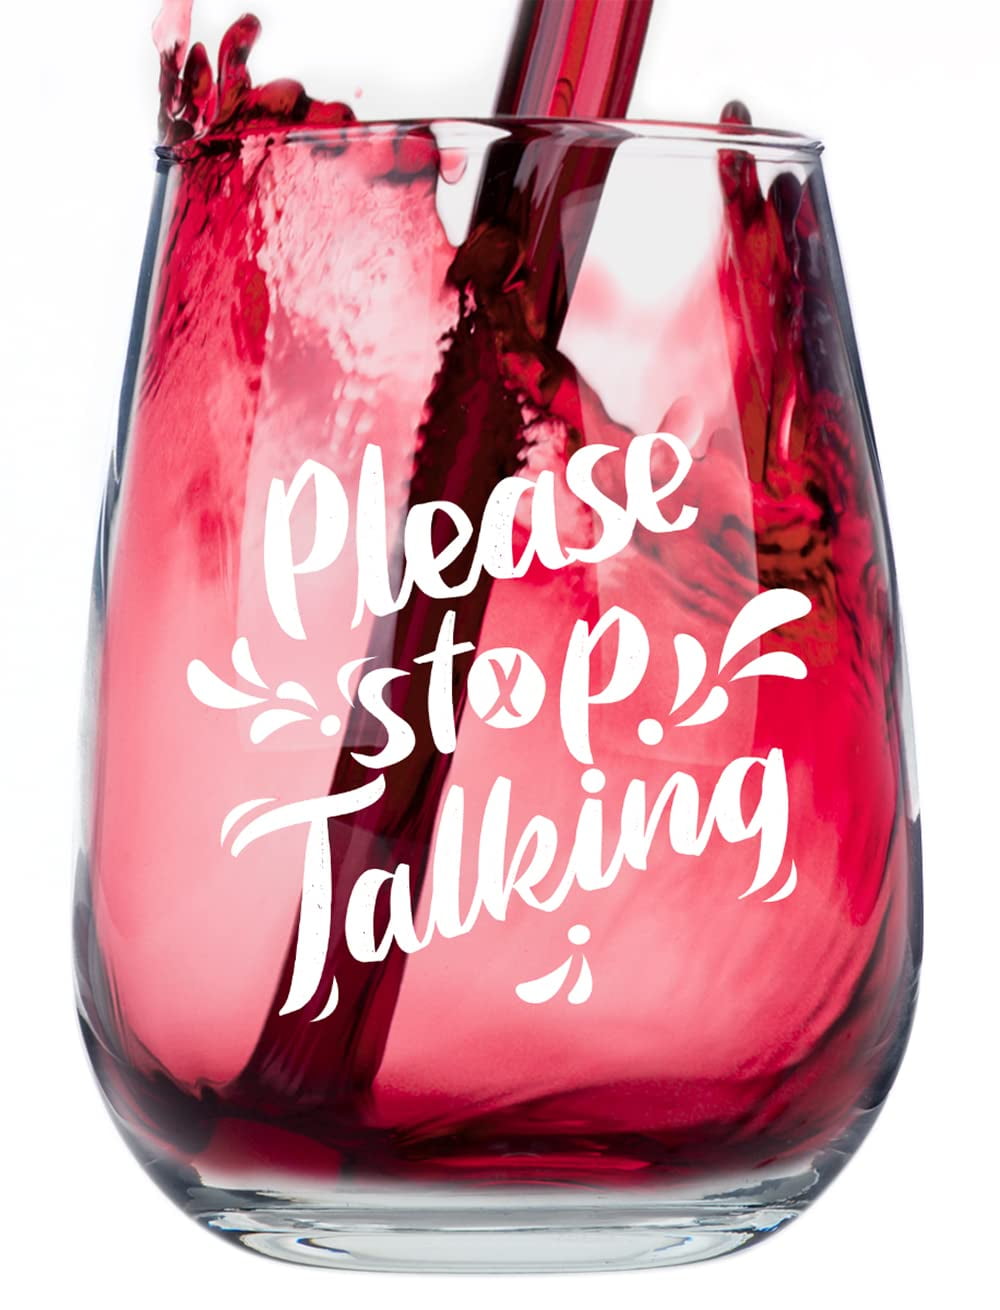 Please Stop Talking - Funny Stemless Wine Glass - Hilarious Gift and  Drinkware for Drinking Buddies and Wine Lovers Under $15! 